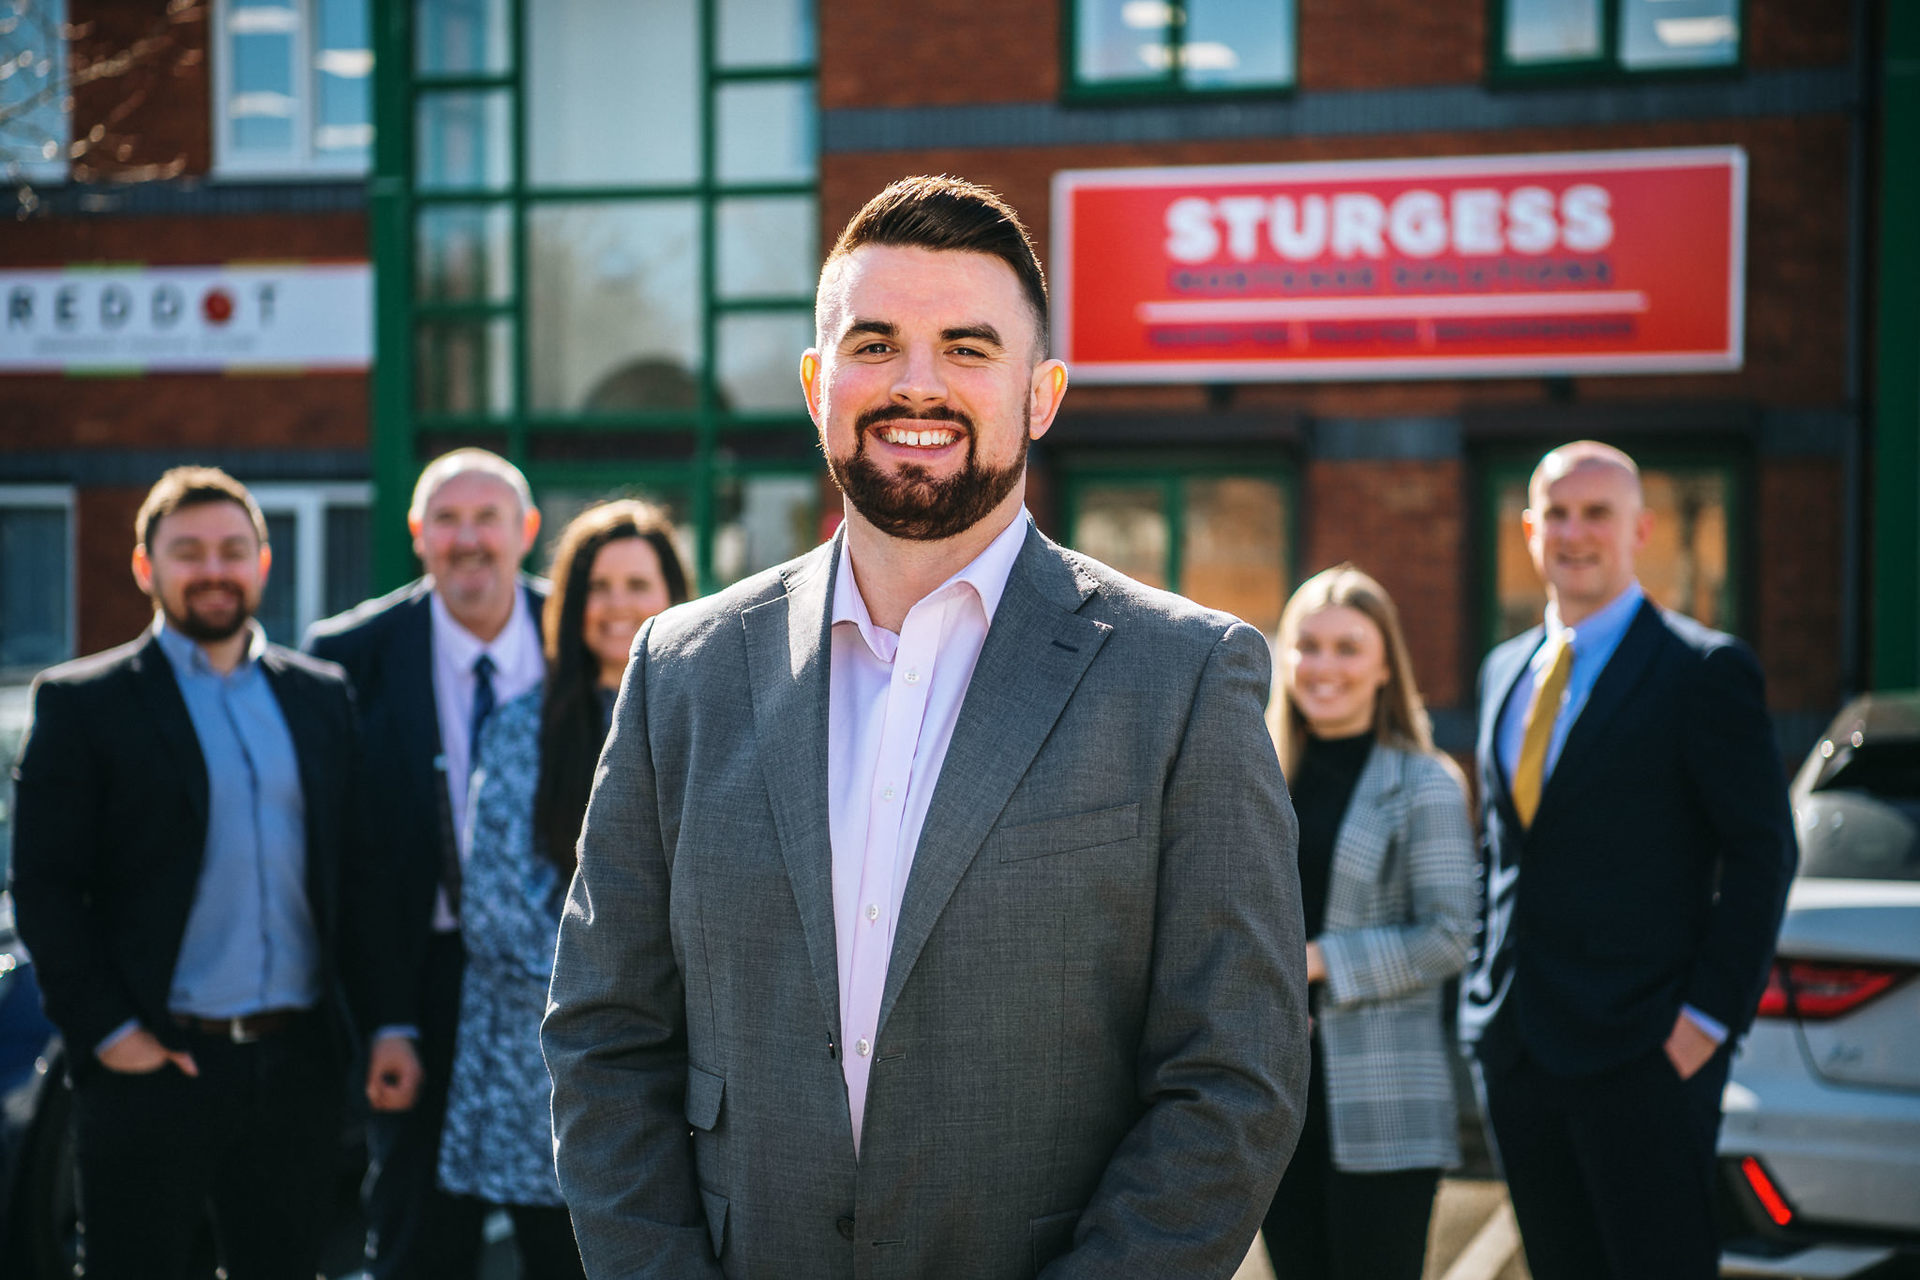 innovationphotography-headshots-commercial-photographer-sturgess-mortgage-solutions-swansea-199_d851589